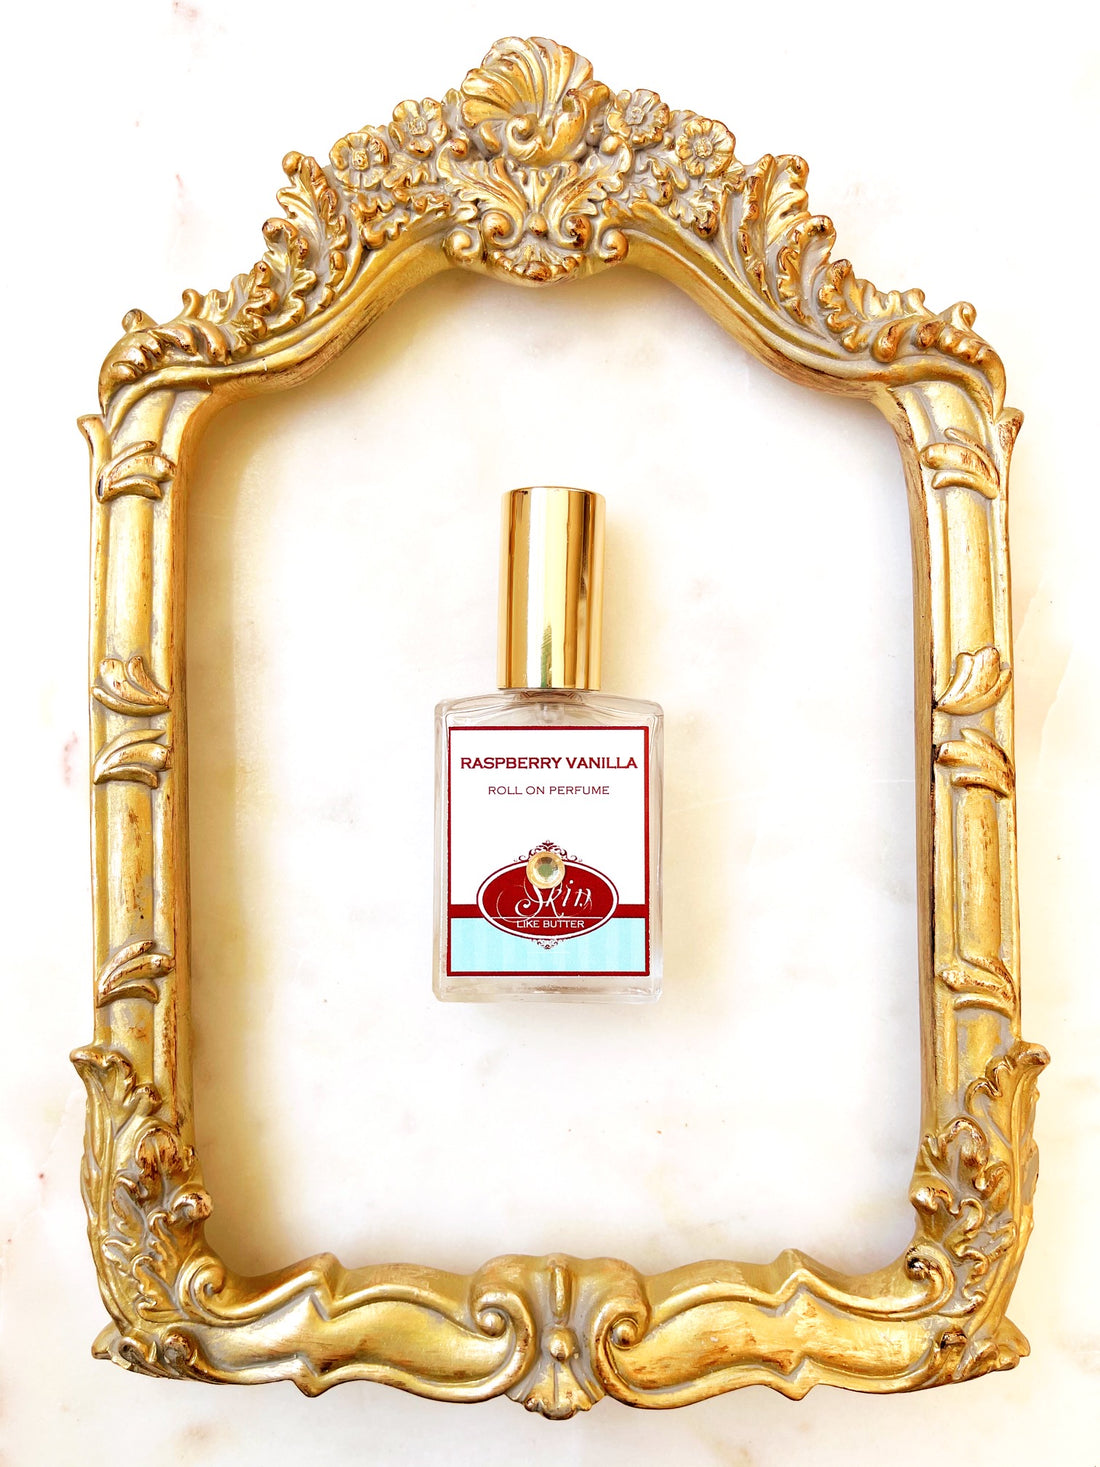 RASPBERRY VANILLA Roll on Perfume Sale! ~ Buy 1 get 1 50% off-use coupon code 2PLEASE